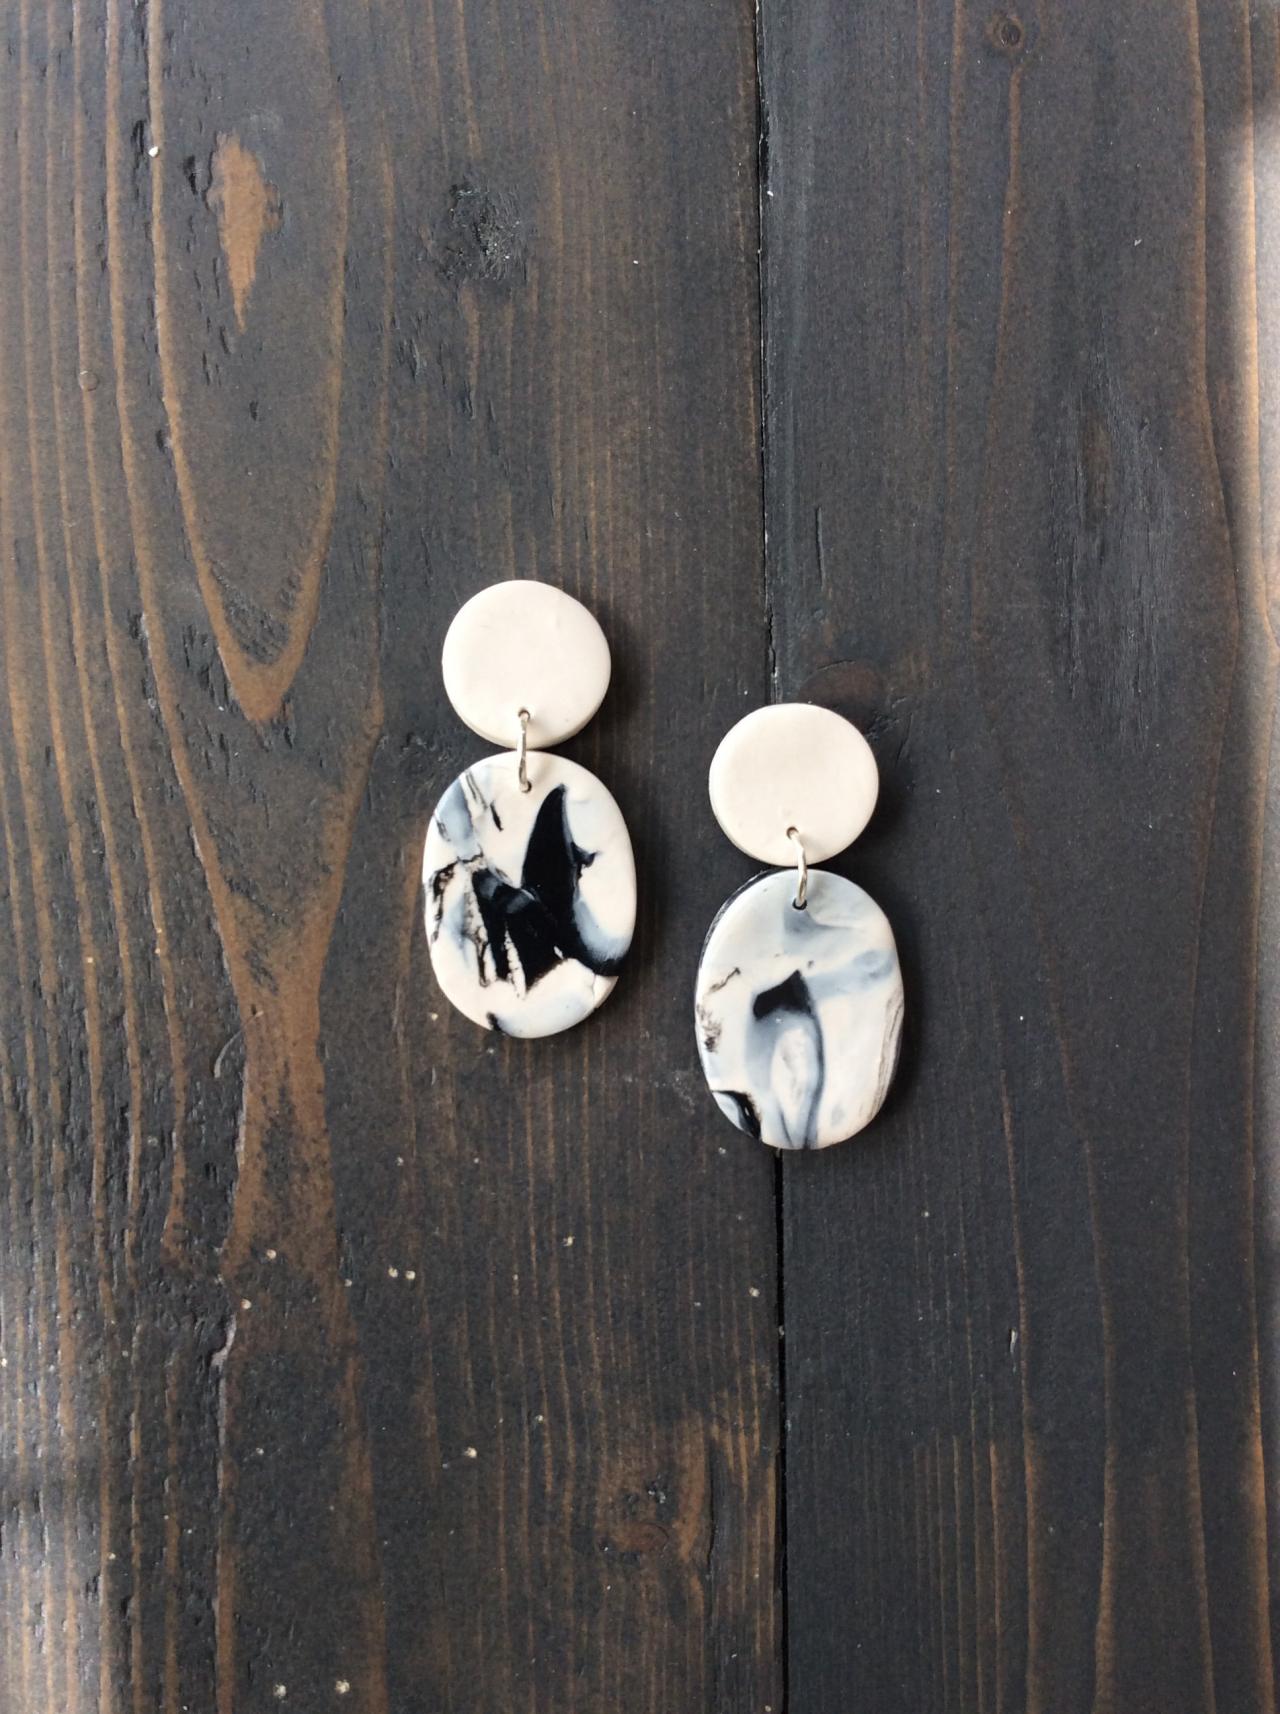 Abstract White And Black Polymer Clay Earrings | Cute Unique Polymer Clay Drop Earrings